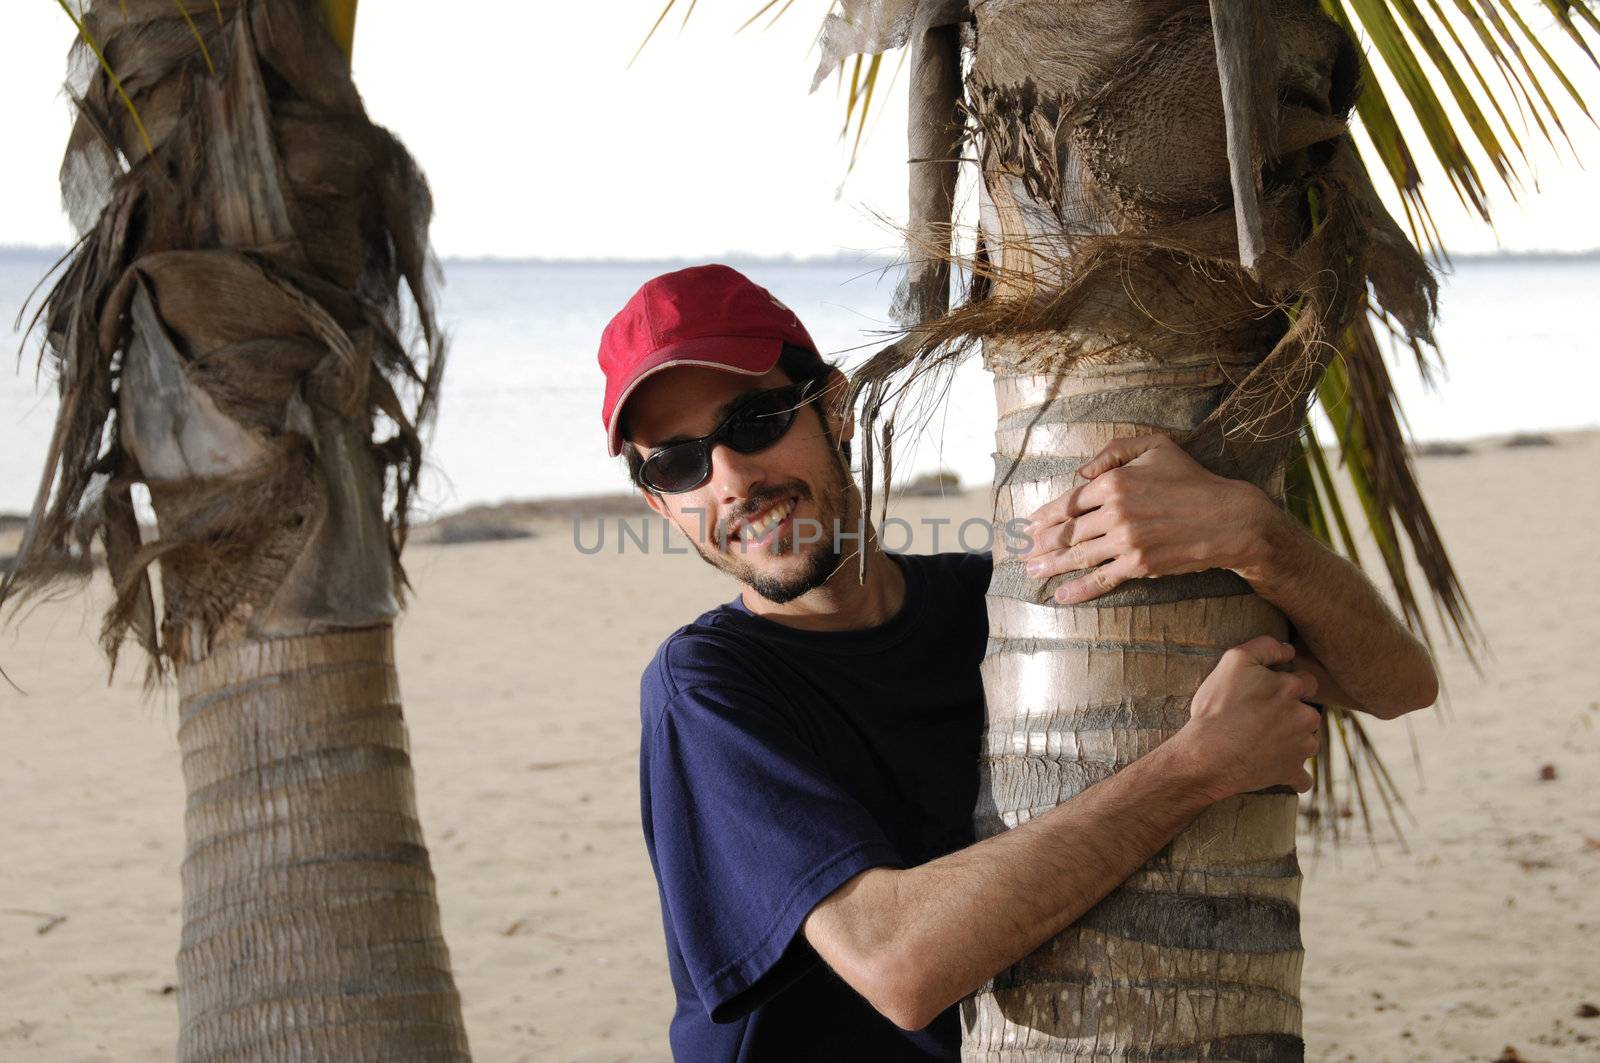 Man embracing coconut palm tree trunk on a beach